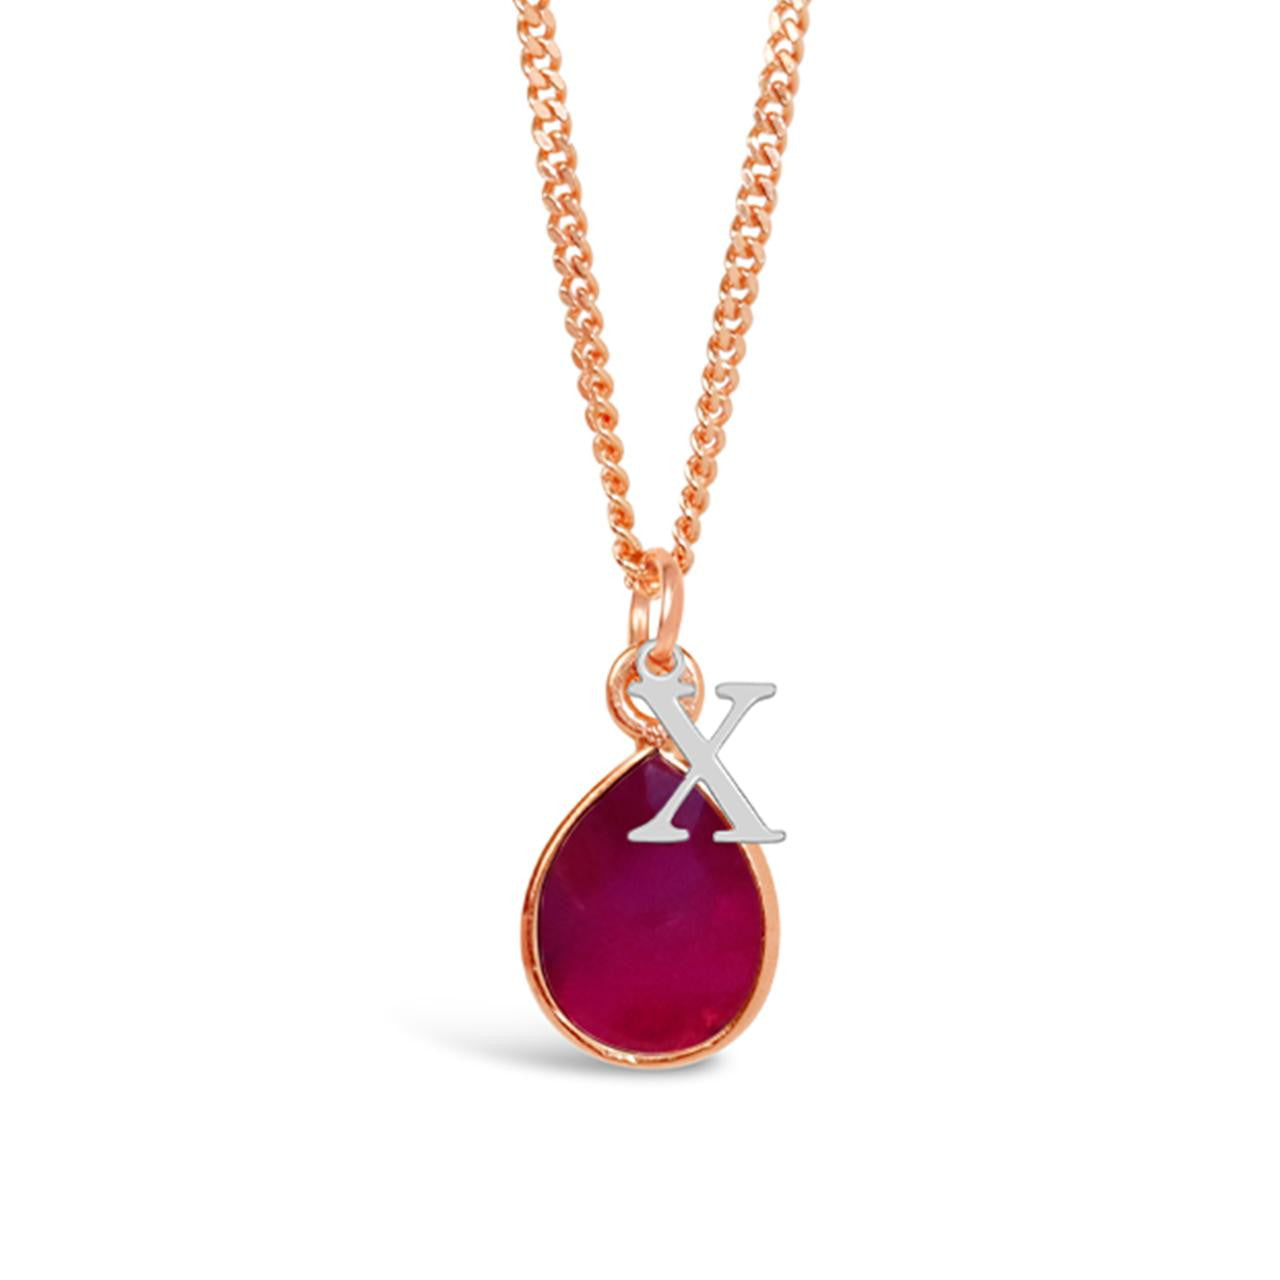 ruby charm necklace in rose gold with silver initial charm on a white background